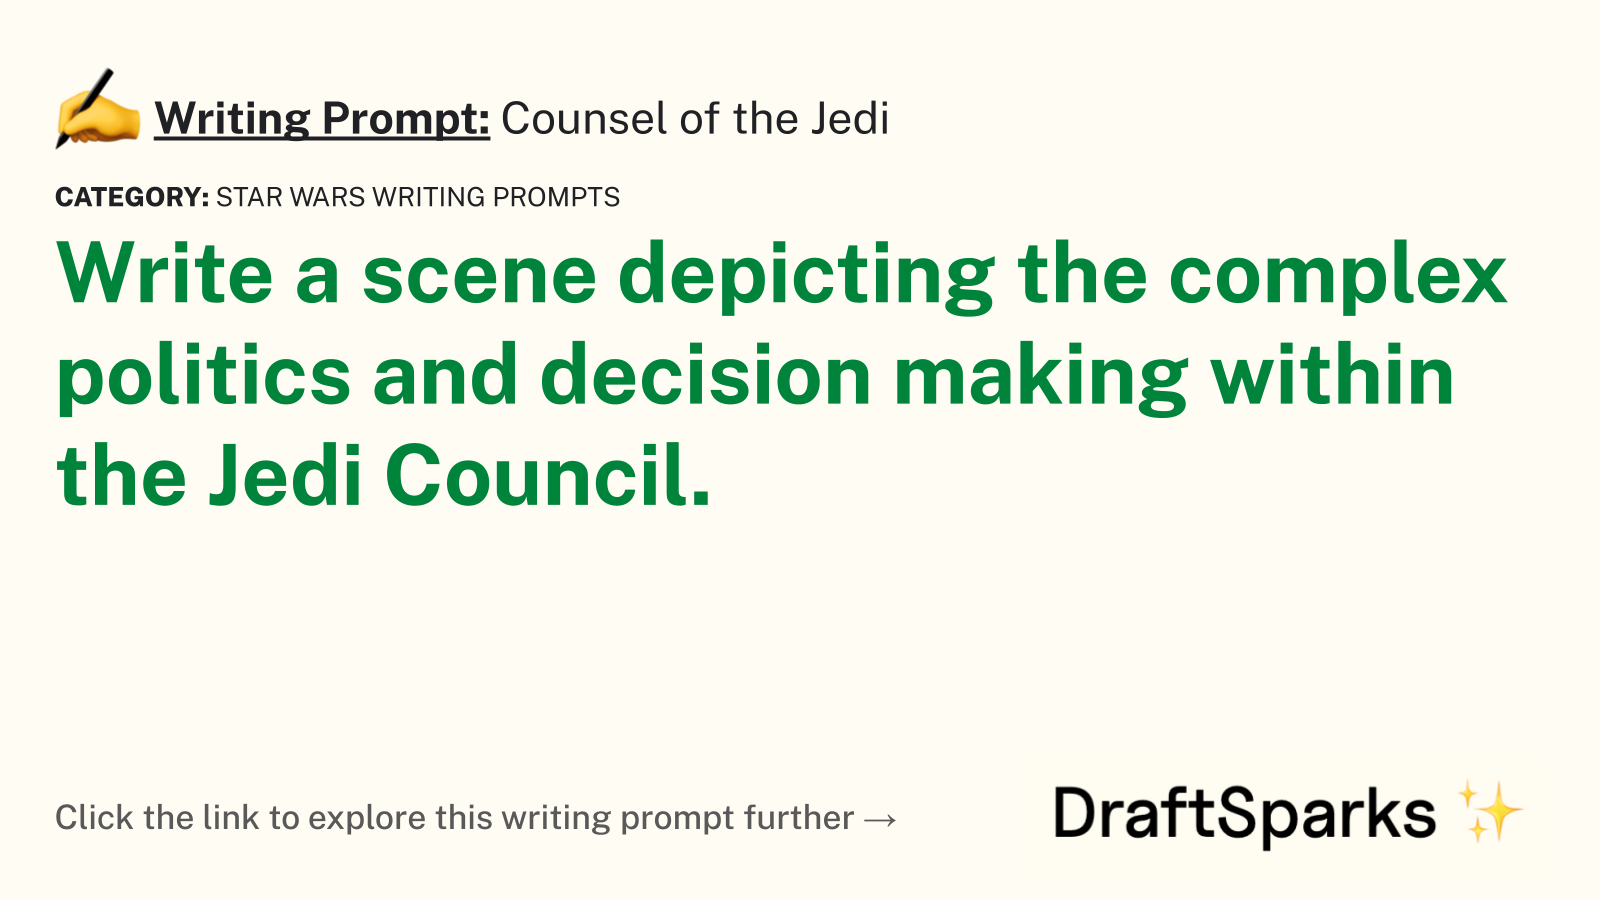 Counsel of the Jedi